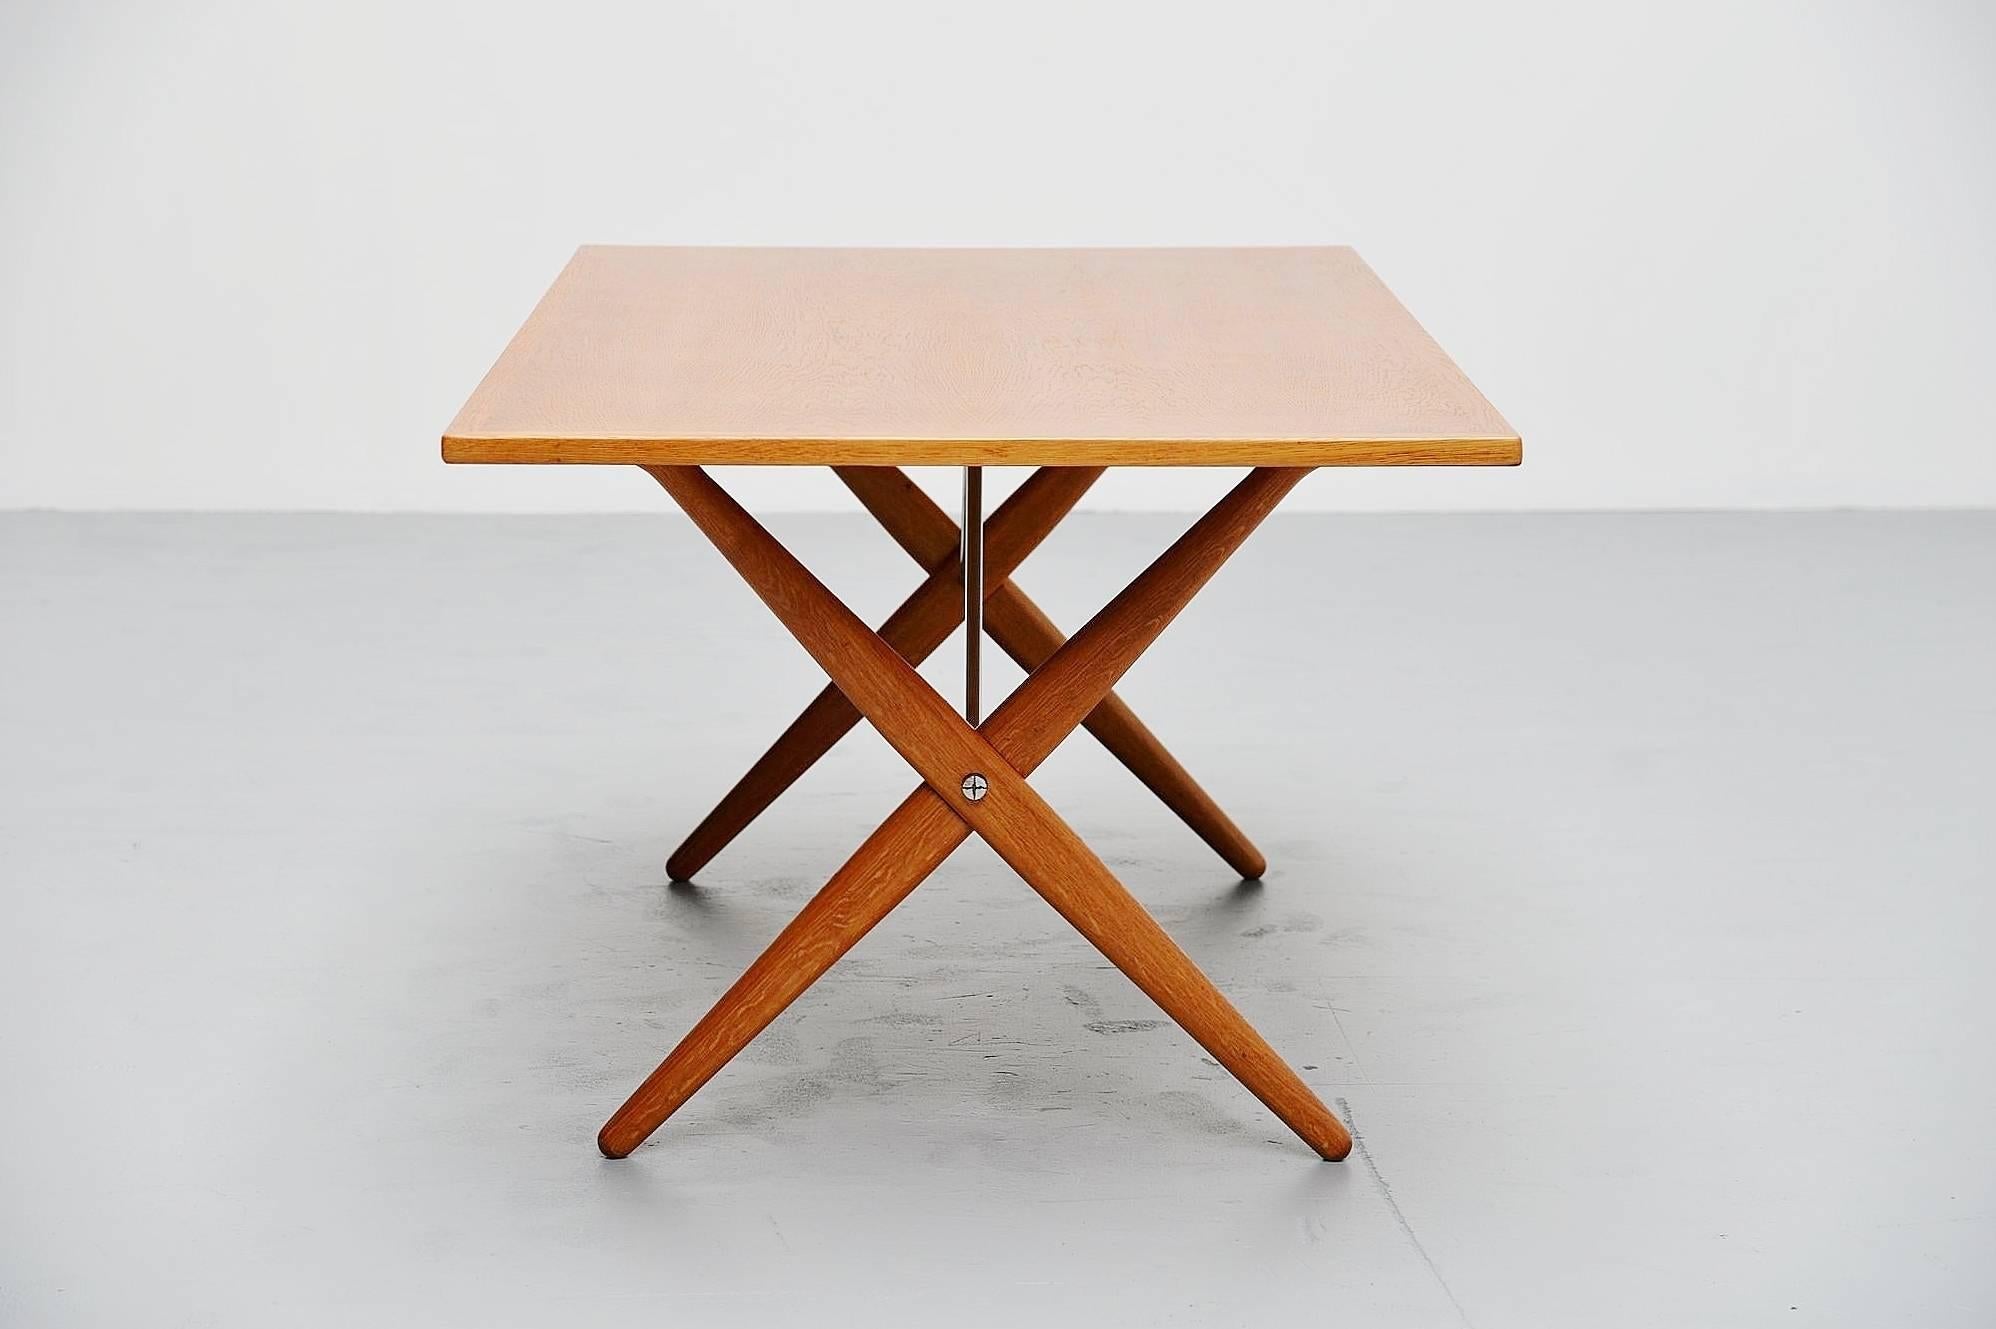 Iconic dining table mode AT-303 designed by Hans J. Wegner, manufactured by Andreas Tuck, Denmark, 1955. This table is made of solid oakwood and has very nice cross legged feet, supported with brushed steel tubular supports in the middle. The table